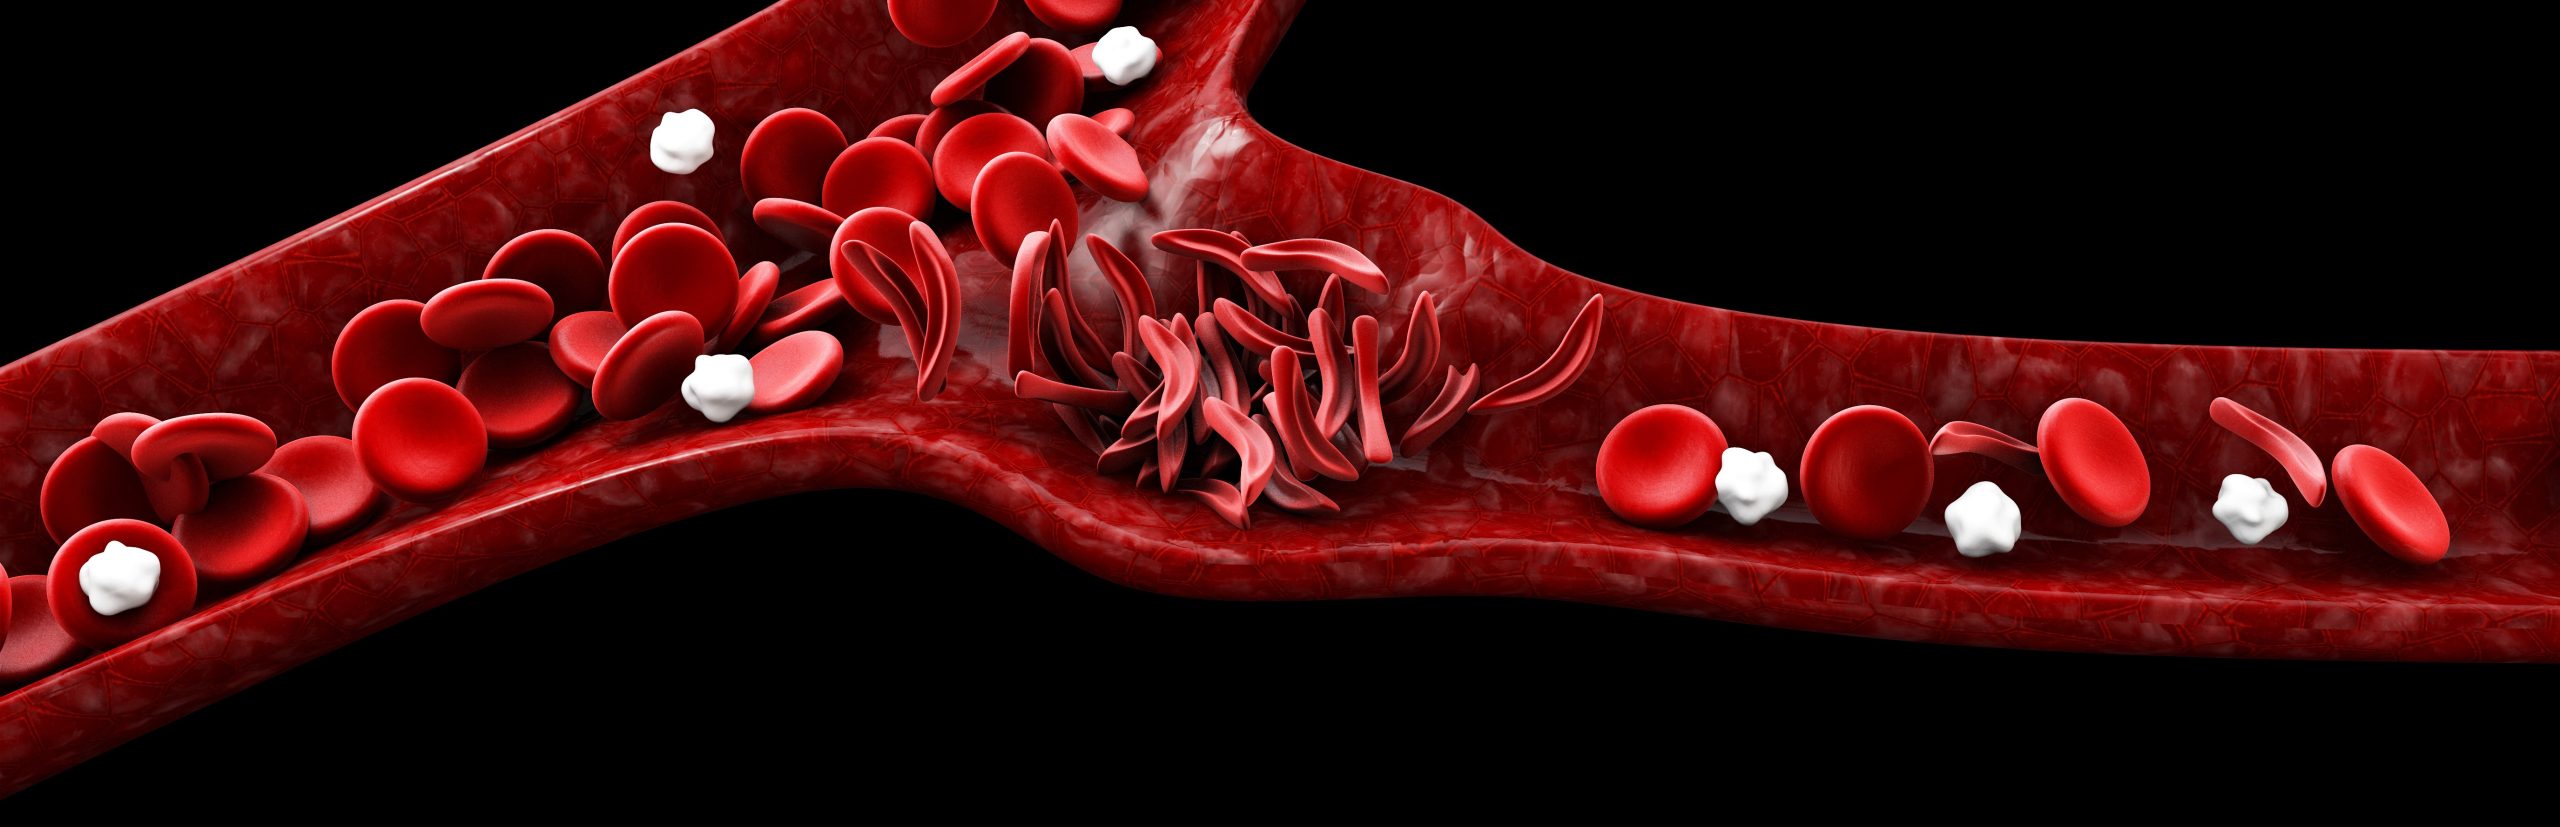 Sickle cell anemia, 3D illustration showing blood vessel with normal and deformed crescent